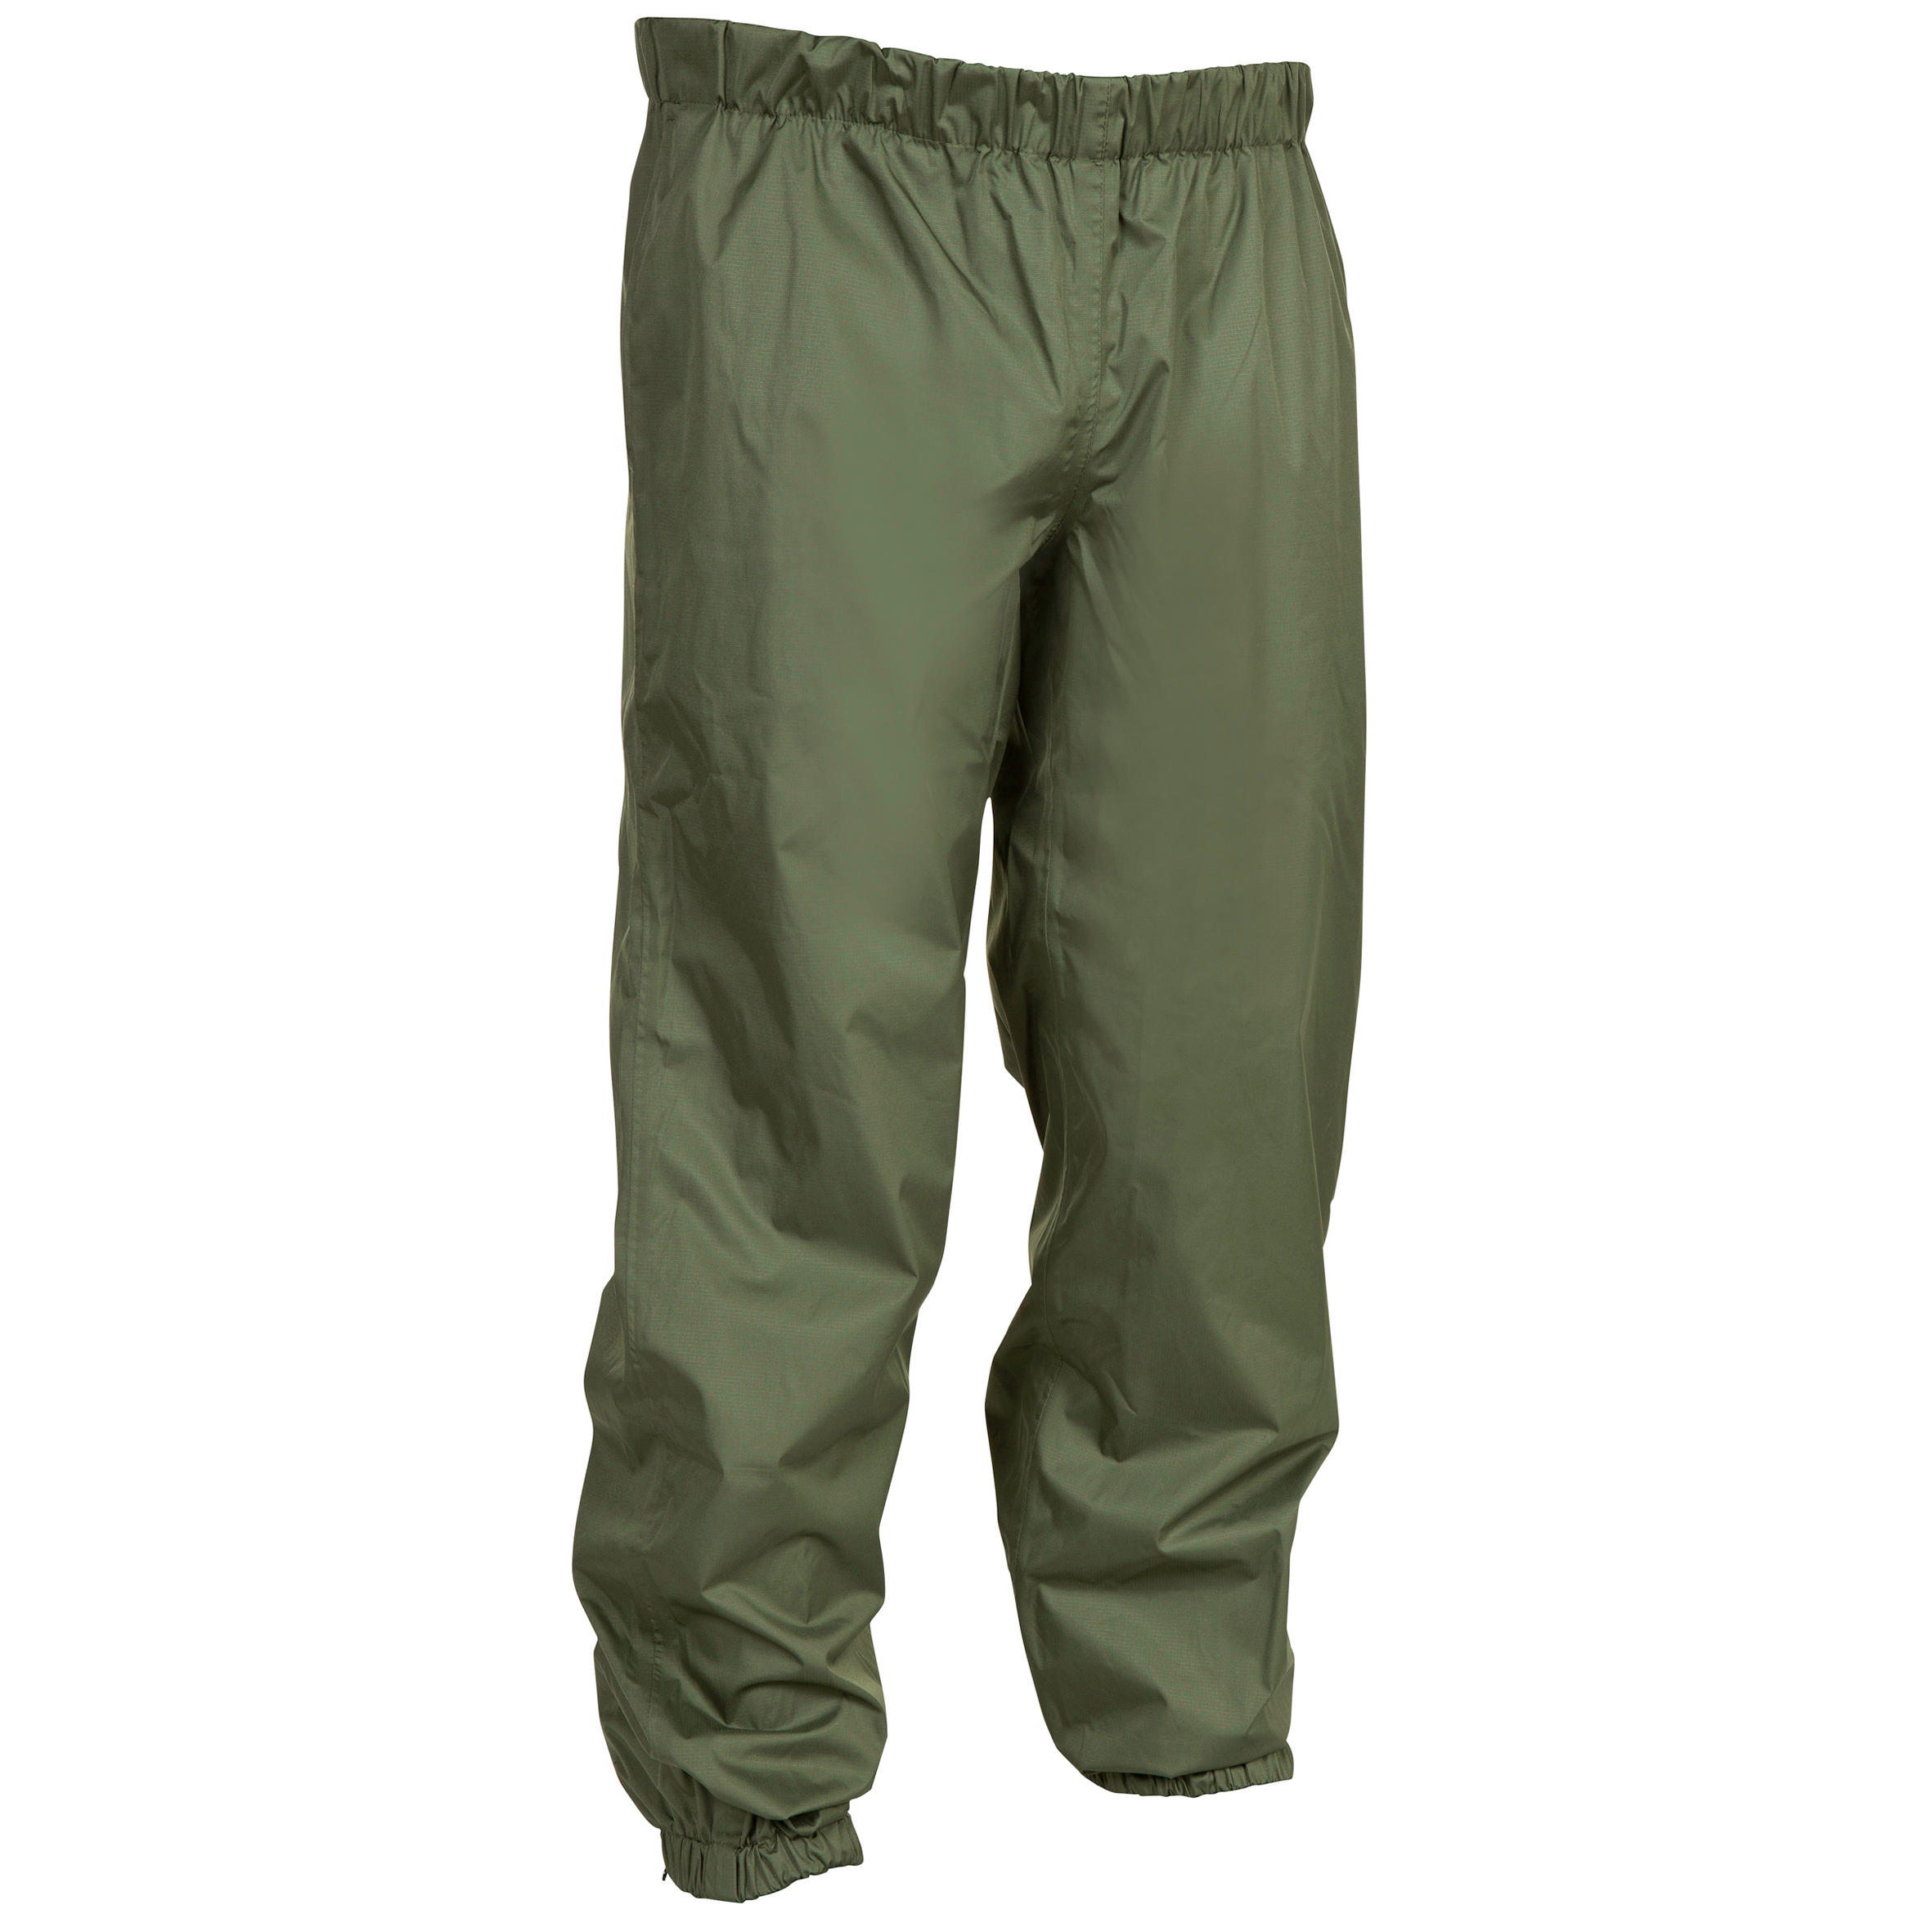 SOLOGNAC Glenarm hunting overtrousers - green